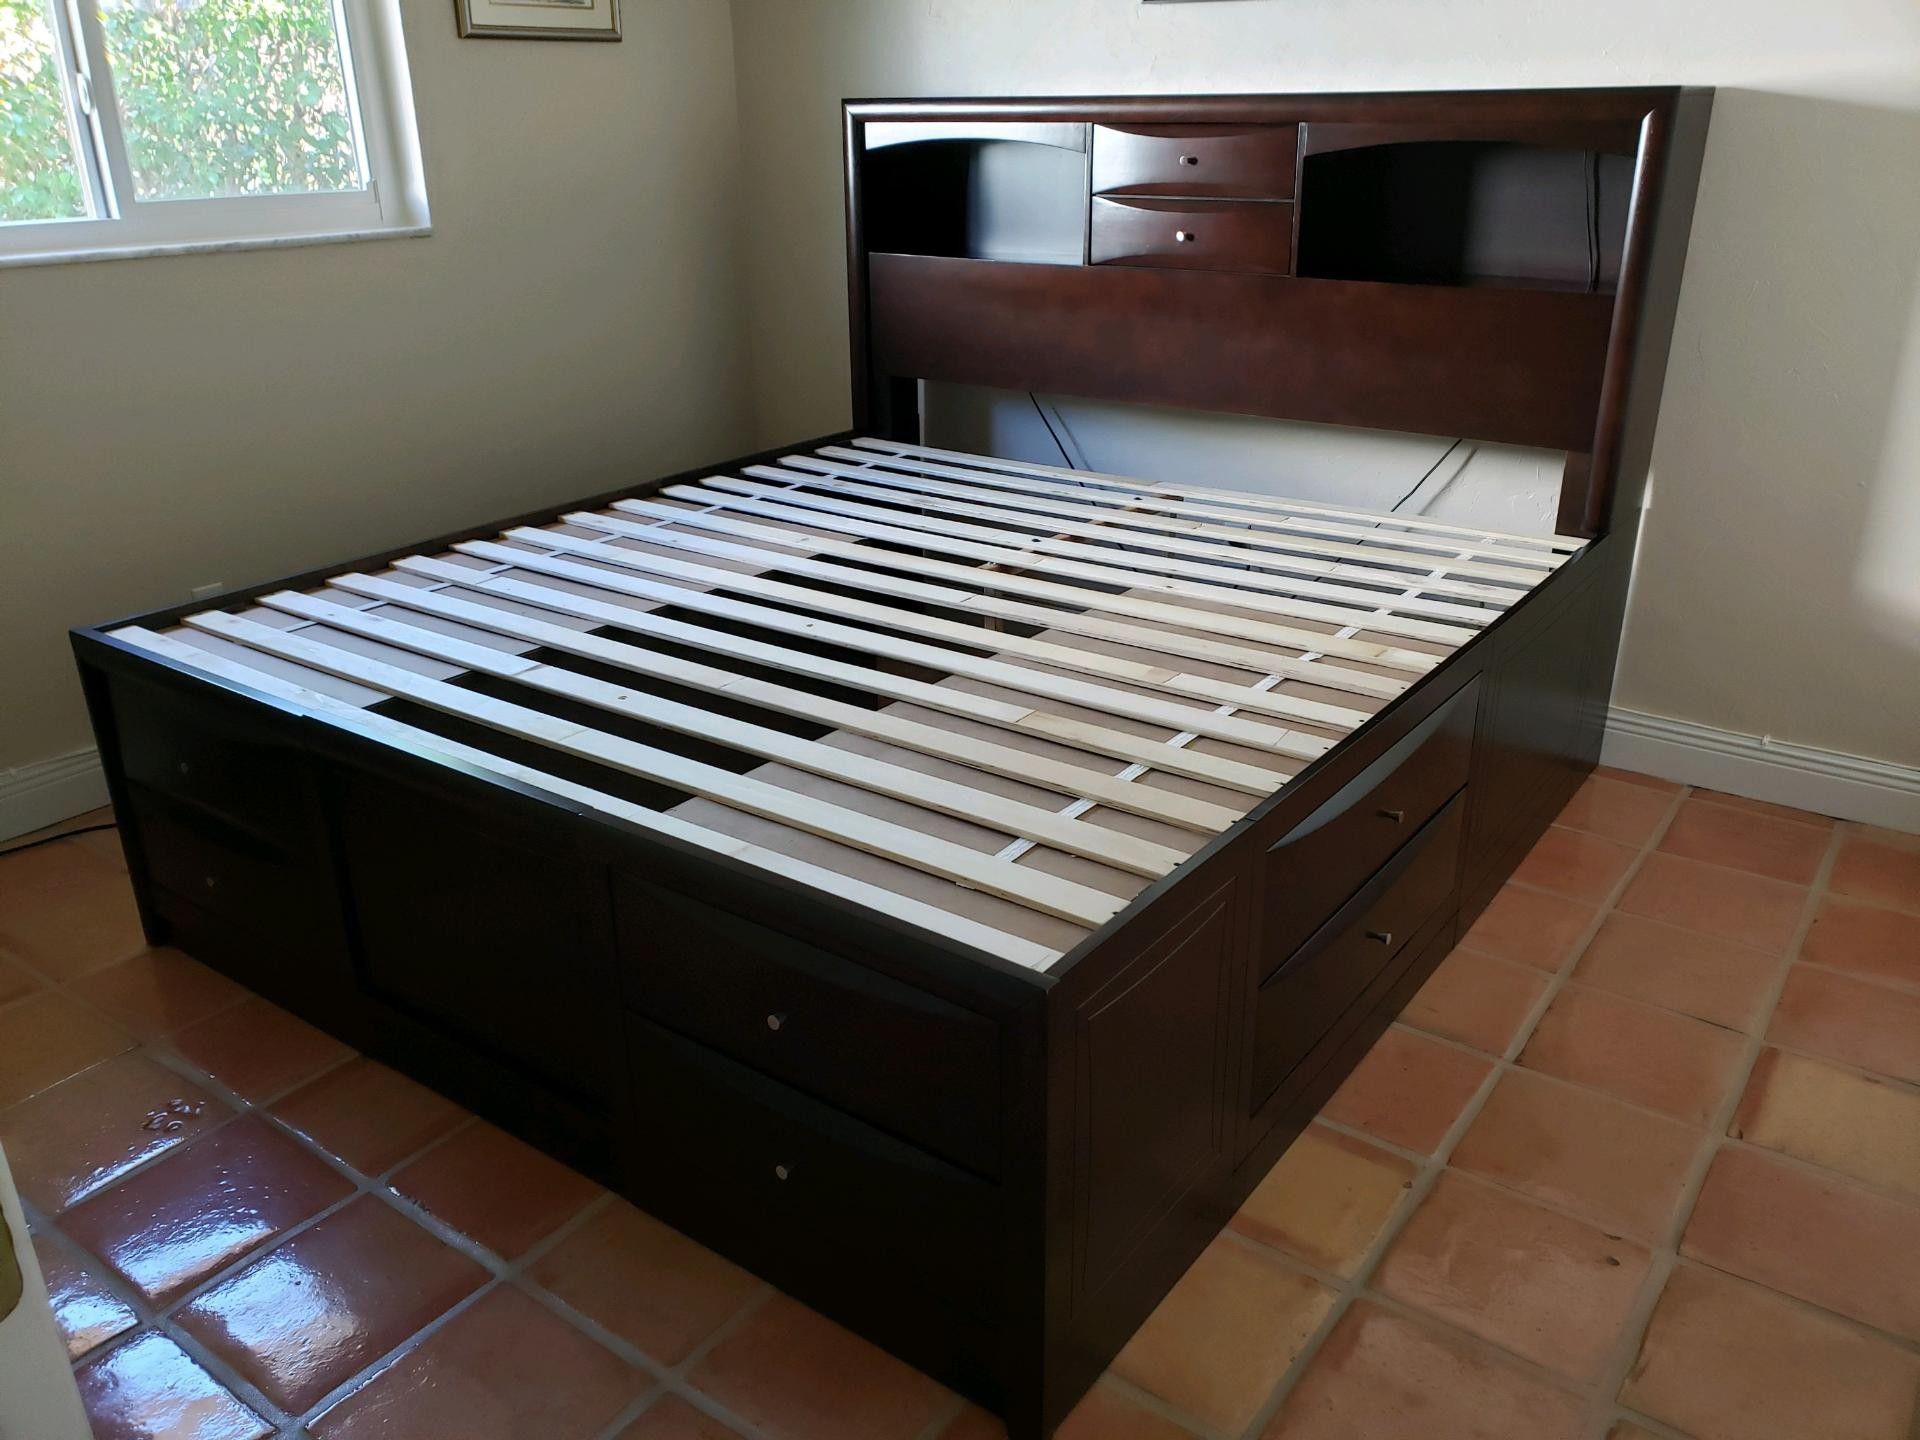 King size bed frame. No damage, no scratches. Lights in cubby hole. Want 500 or best offer